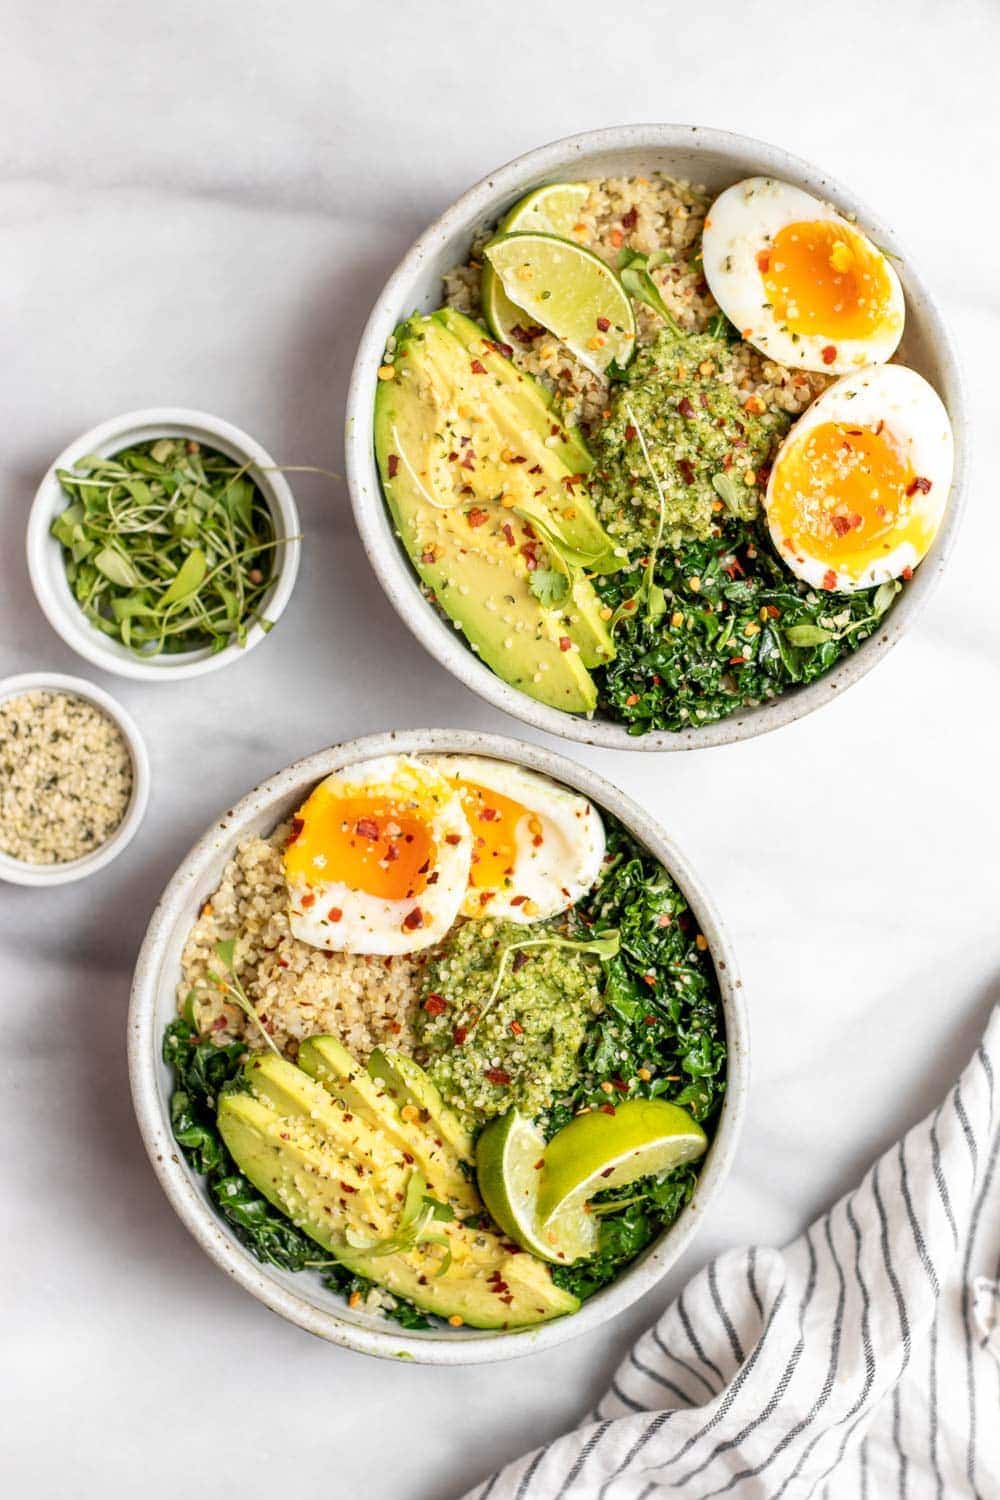 Quinoa breakfast bowl with kale, egg and avocado.